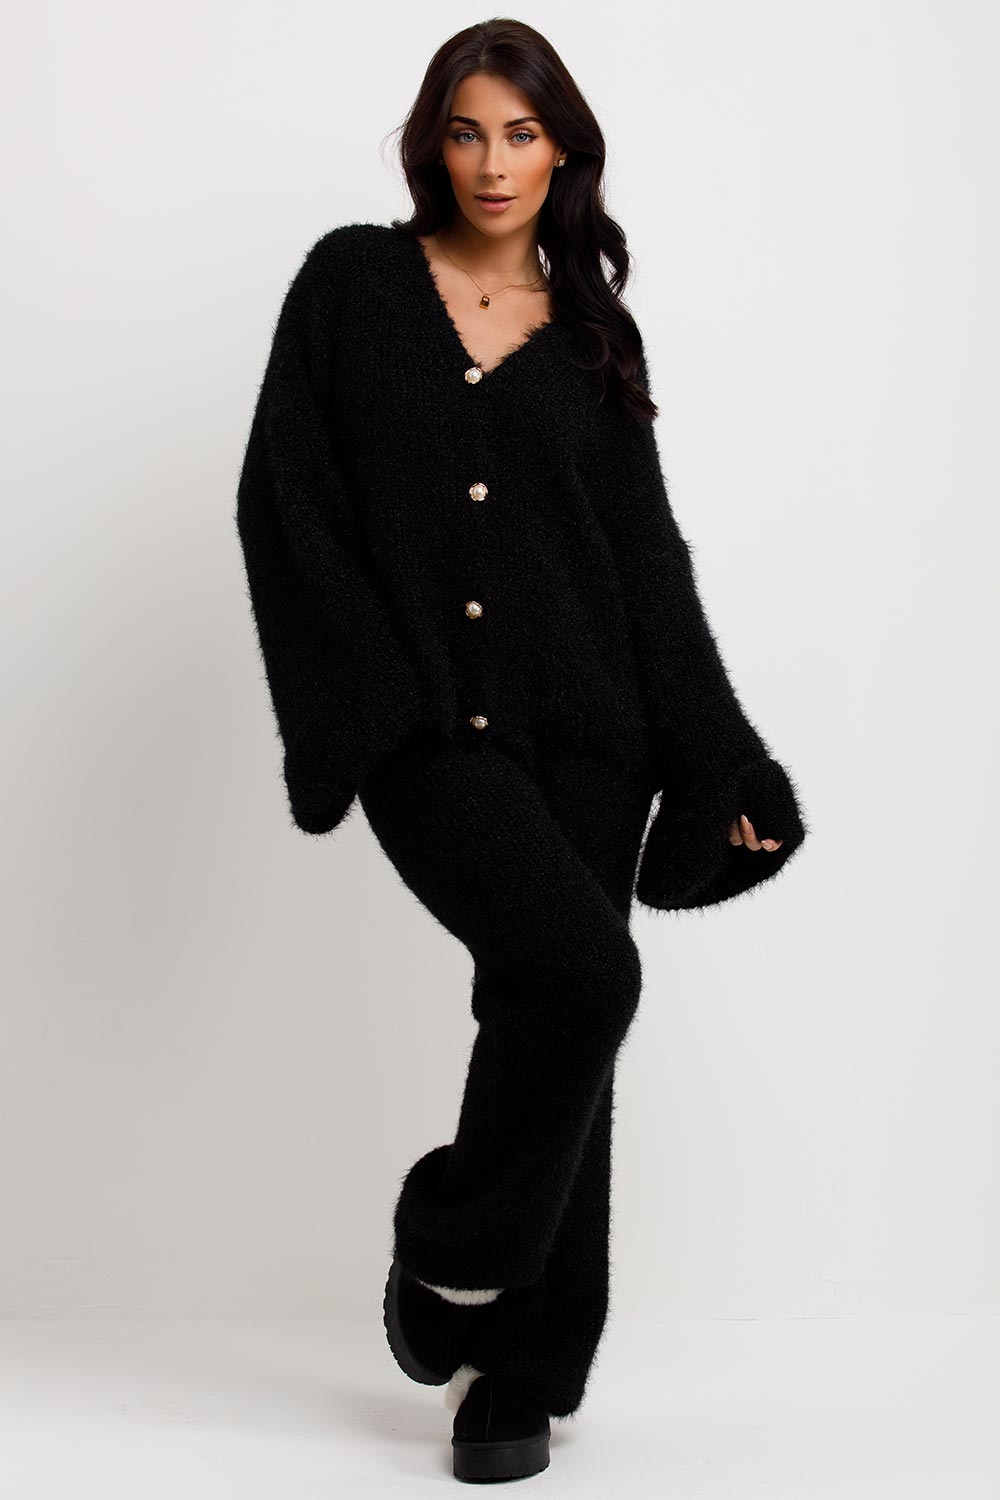 womens black knitted oversized cardigan with buttons and trousers co ord set